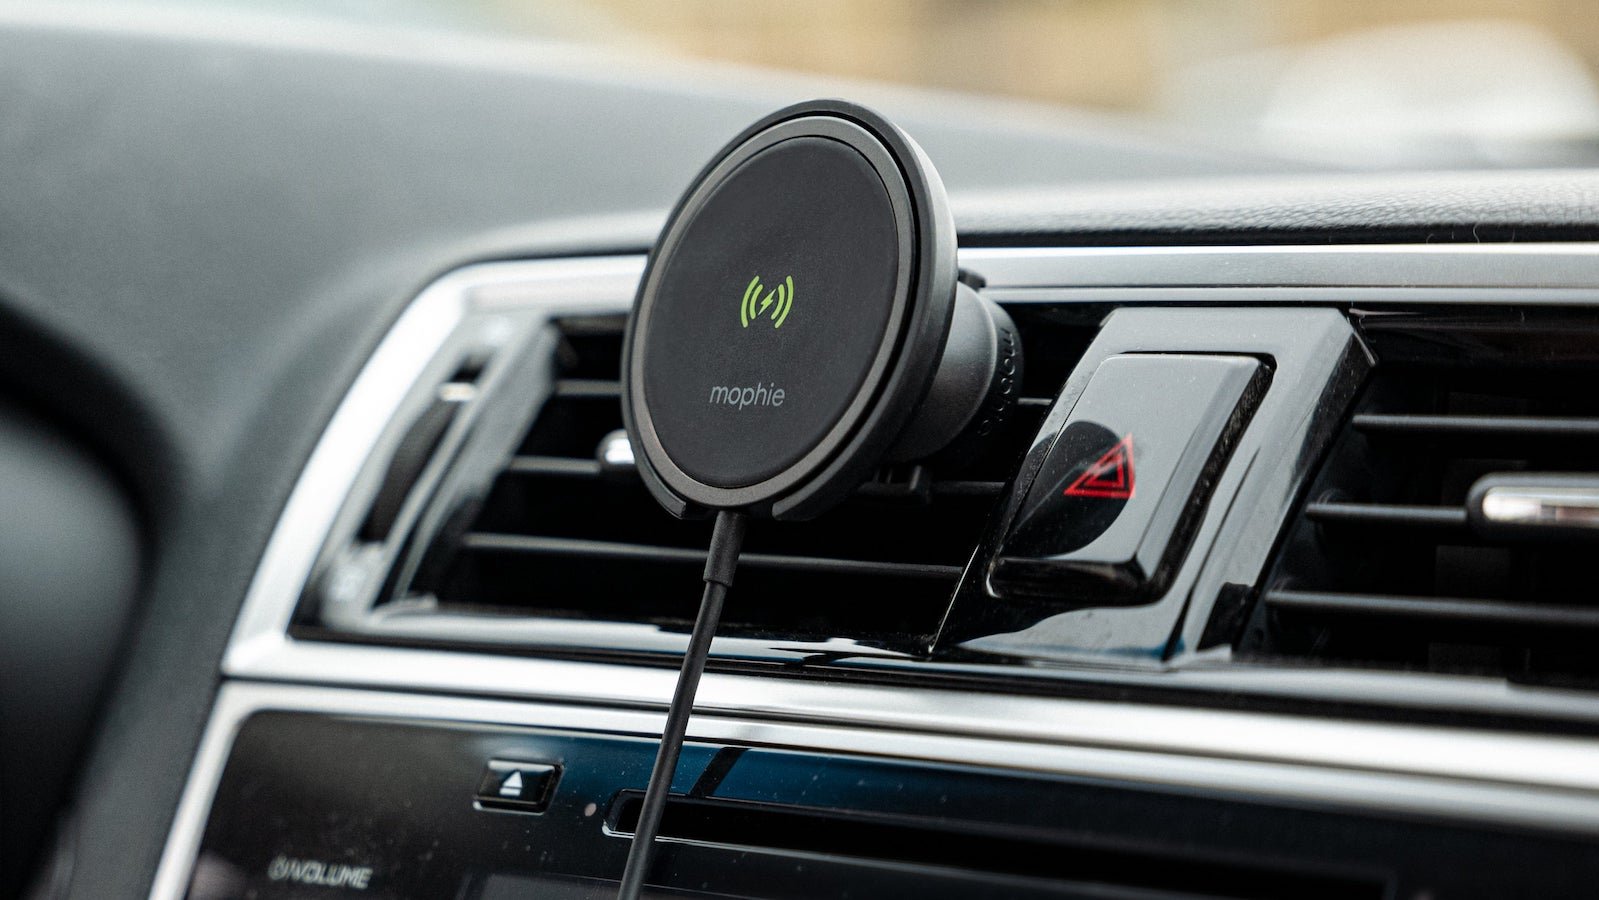 mophie snap+ wireless vent mount MagSafe car charger provides universal wireless charging